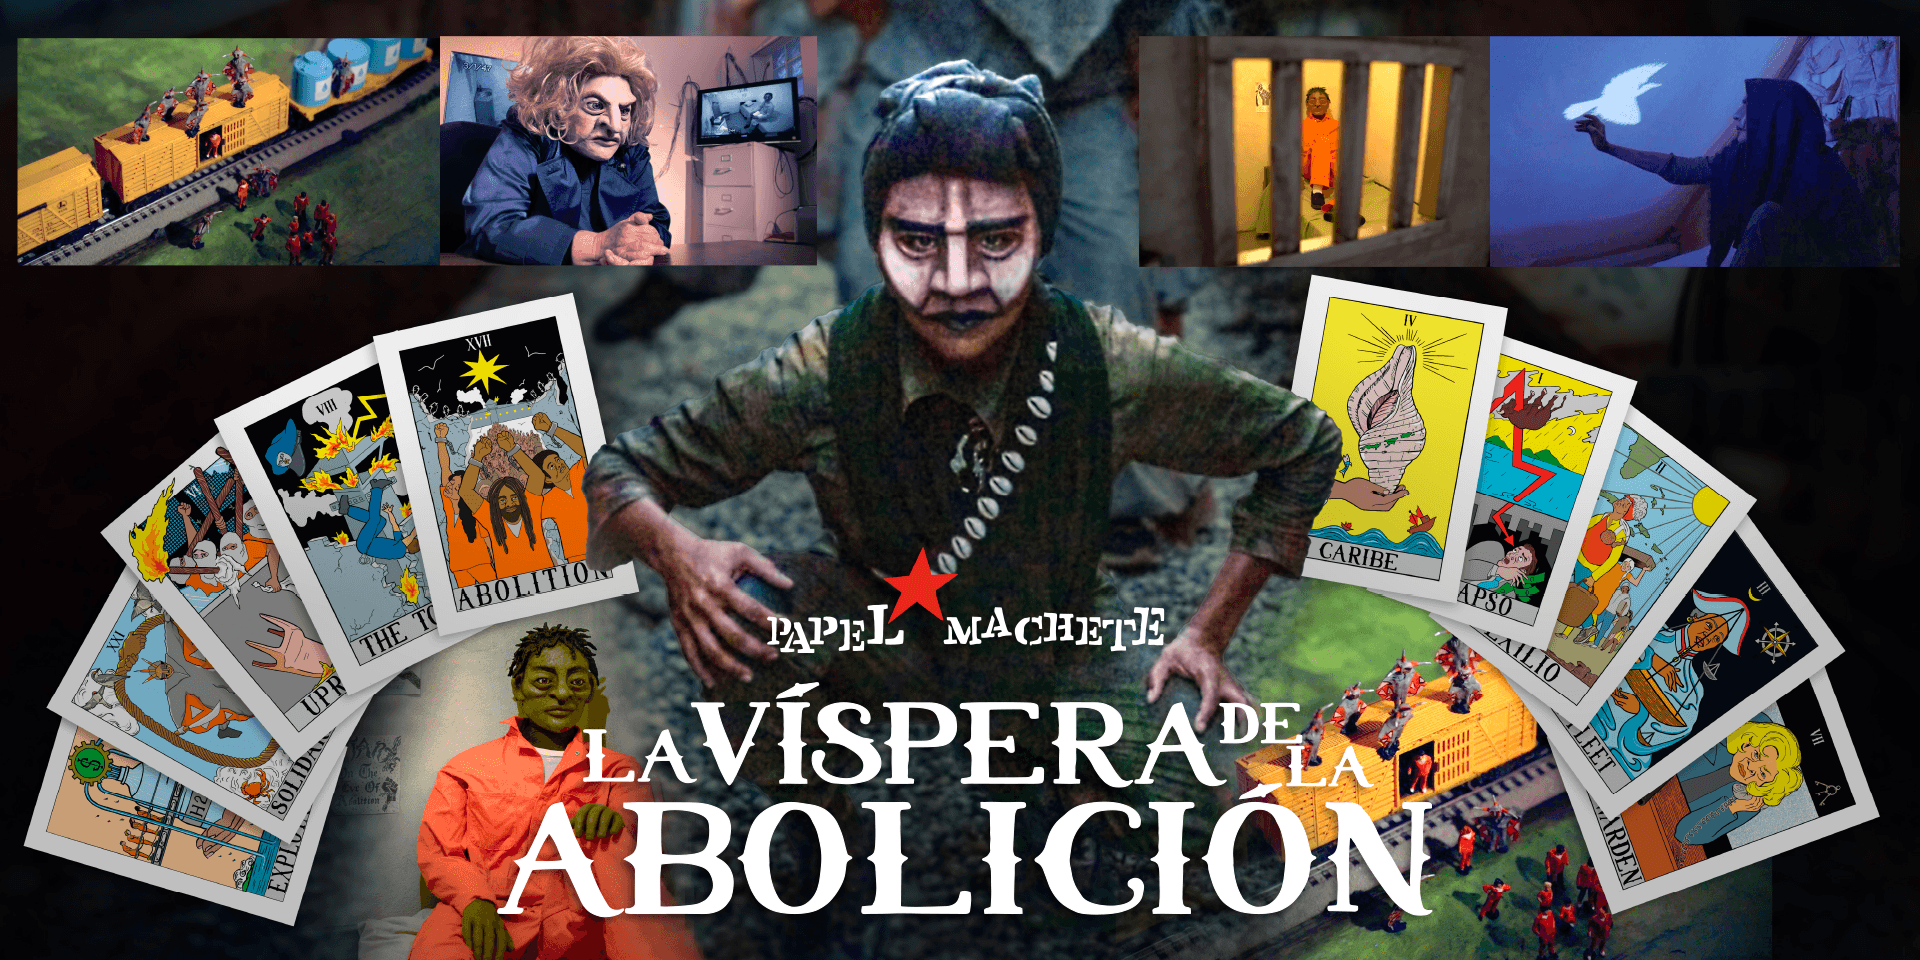 Promotional graphic image for On the Eve of Abolition. A masked character is crouching on the ground. Tarot cards and fanned out around her. Above her are move images from the play including a still from a stop motion film, The Warden masked character, a life-size puppet of a prisoner, and the same masked character in a tent with a shadow of a bird resting on her hand. 